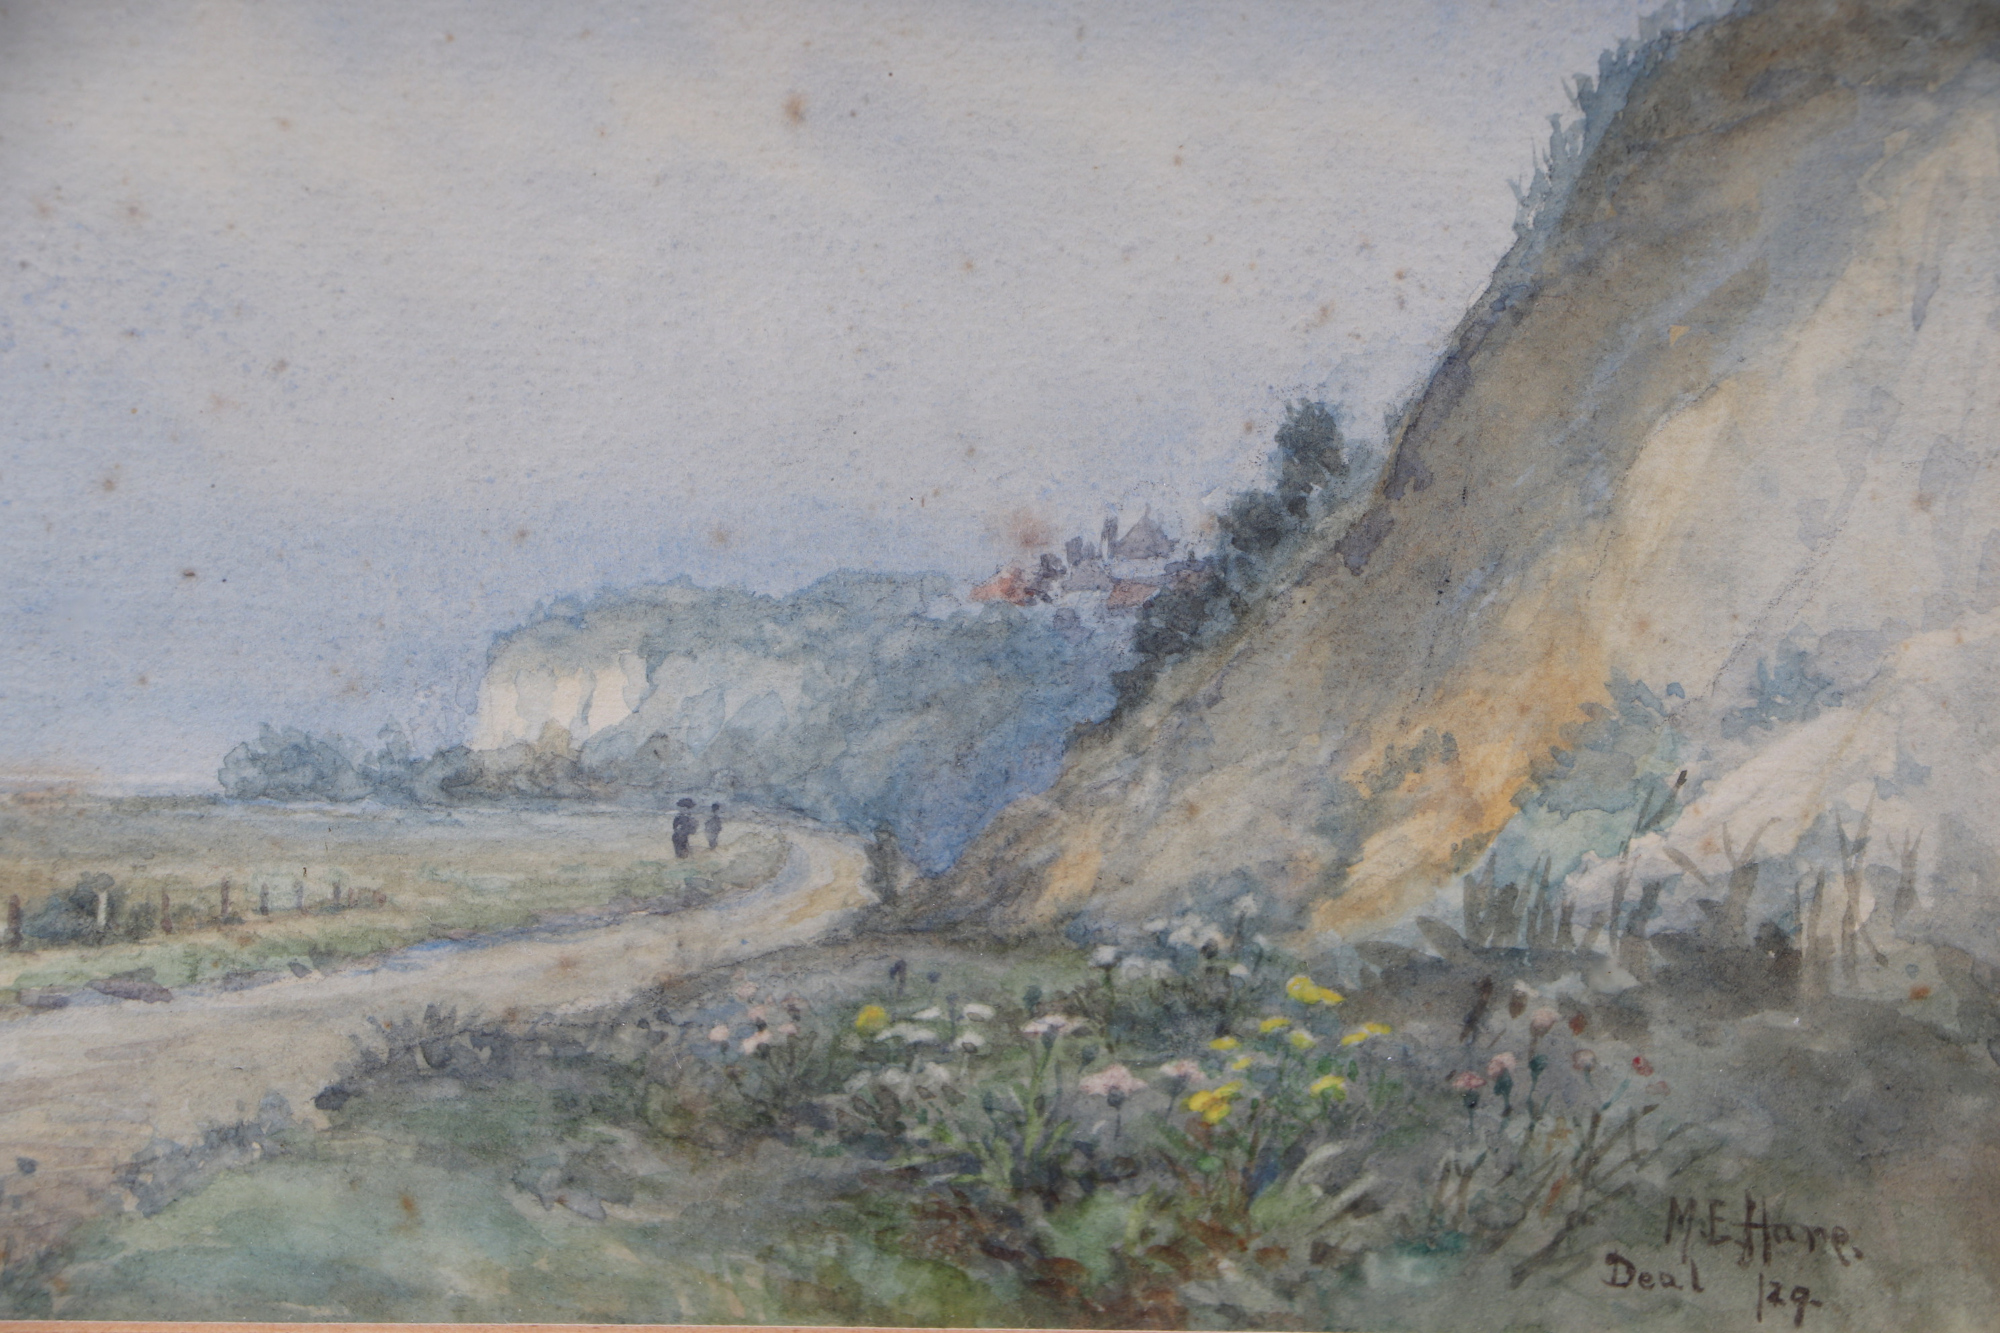 M E Hare (Early 20th century British) - Deal, Kent, Cliffside Walk- signed and dated lower right - Image 2 of 4